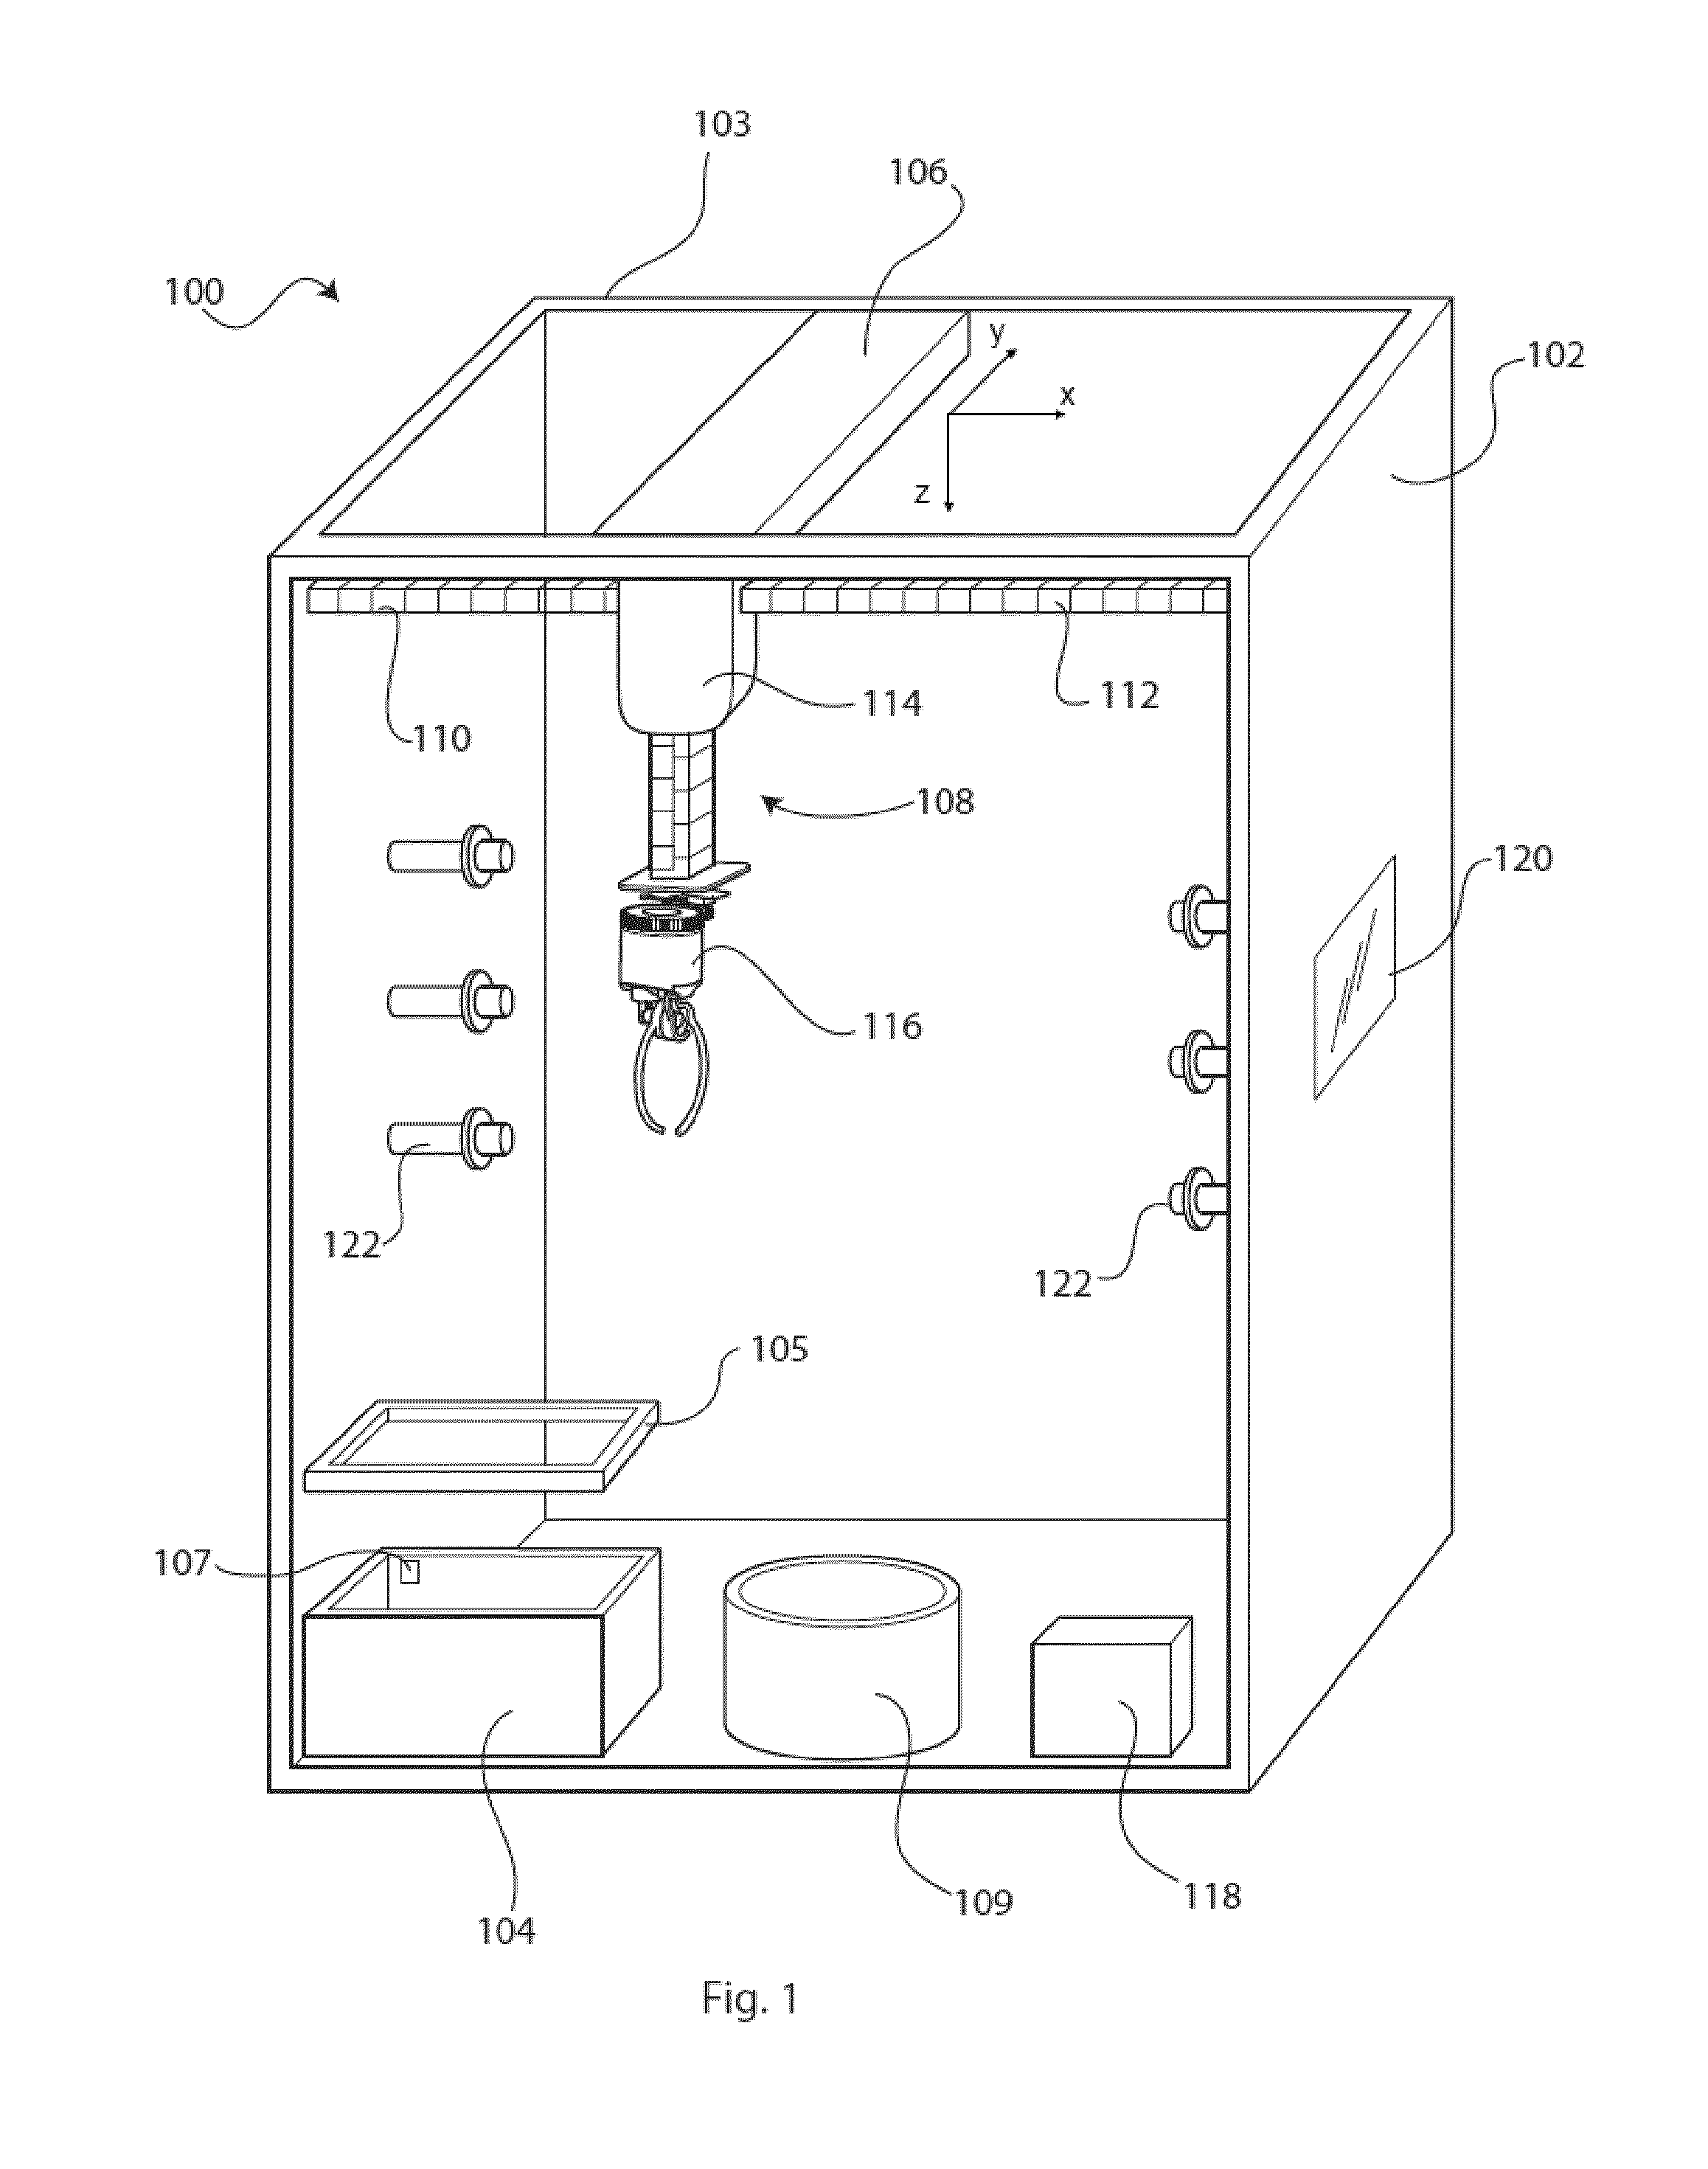 System, apparatus, and method of handling, storing and managing garments